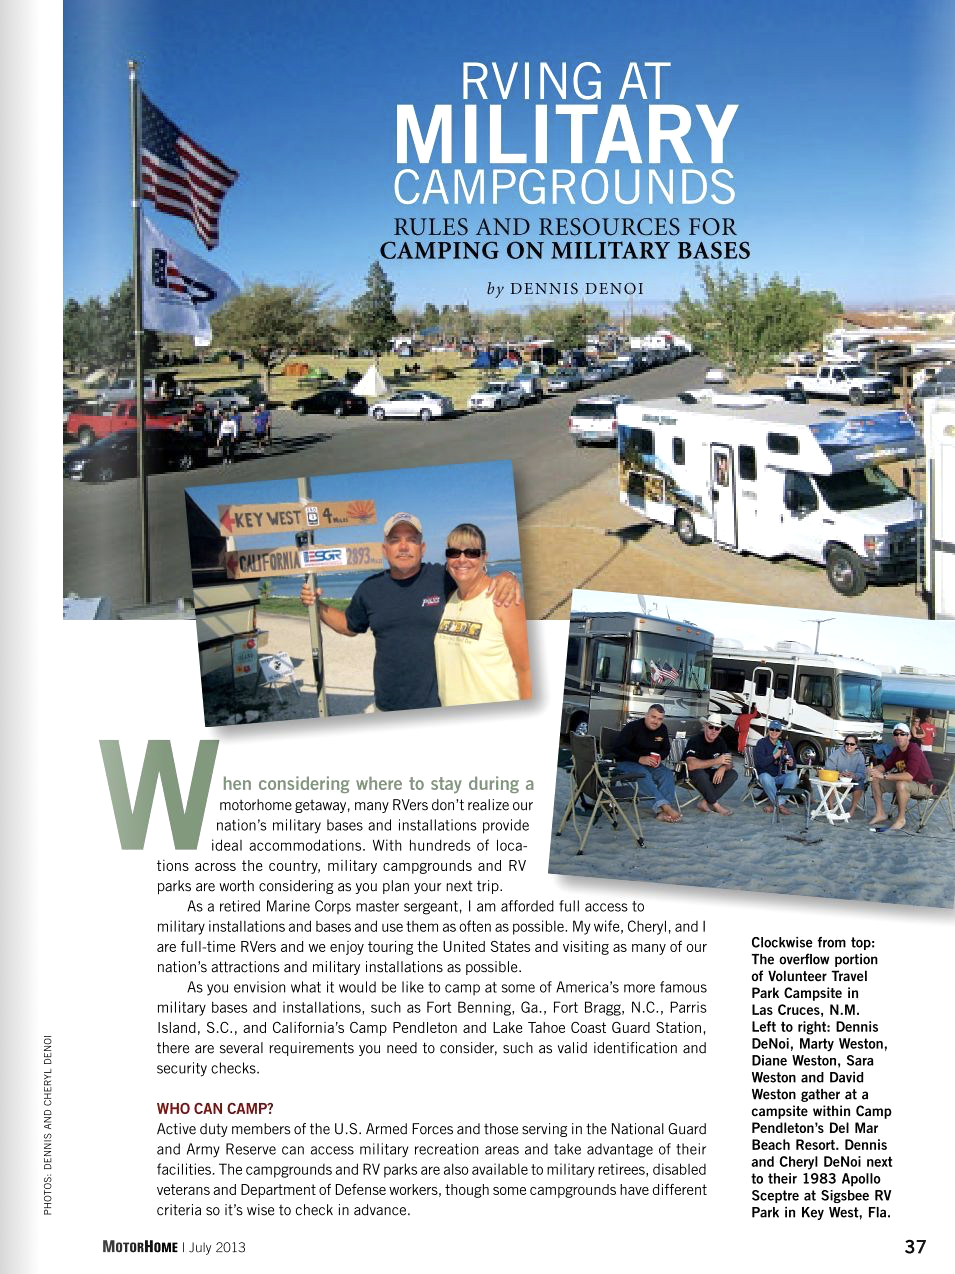 RVing at Military Campgrounds